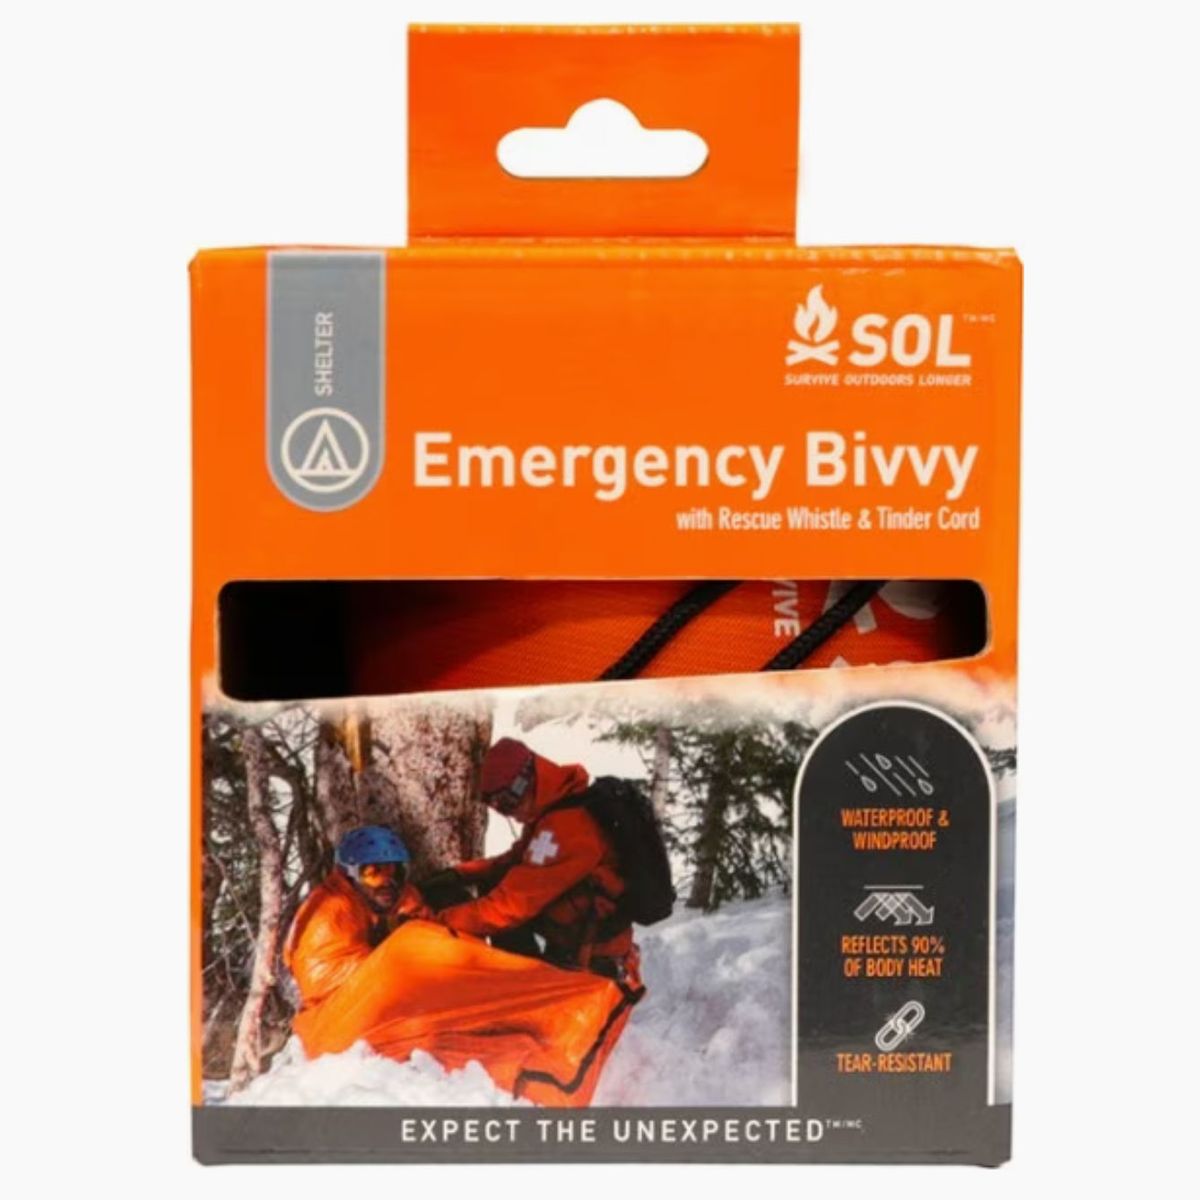 SOL Emergency Bivvy with Rescue Whistle and Tinder Cord